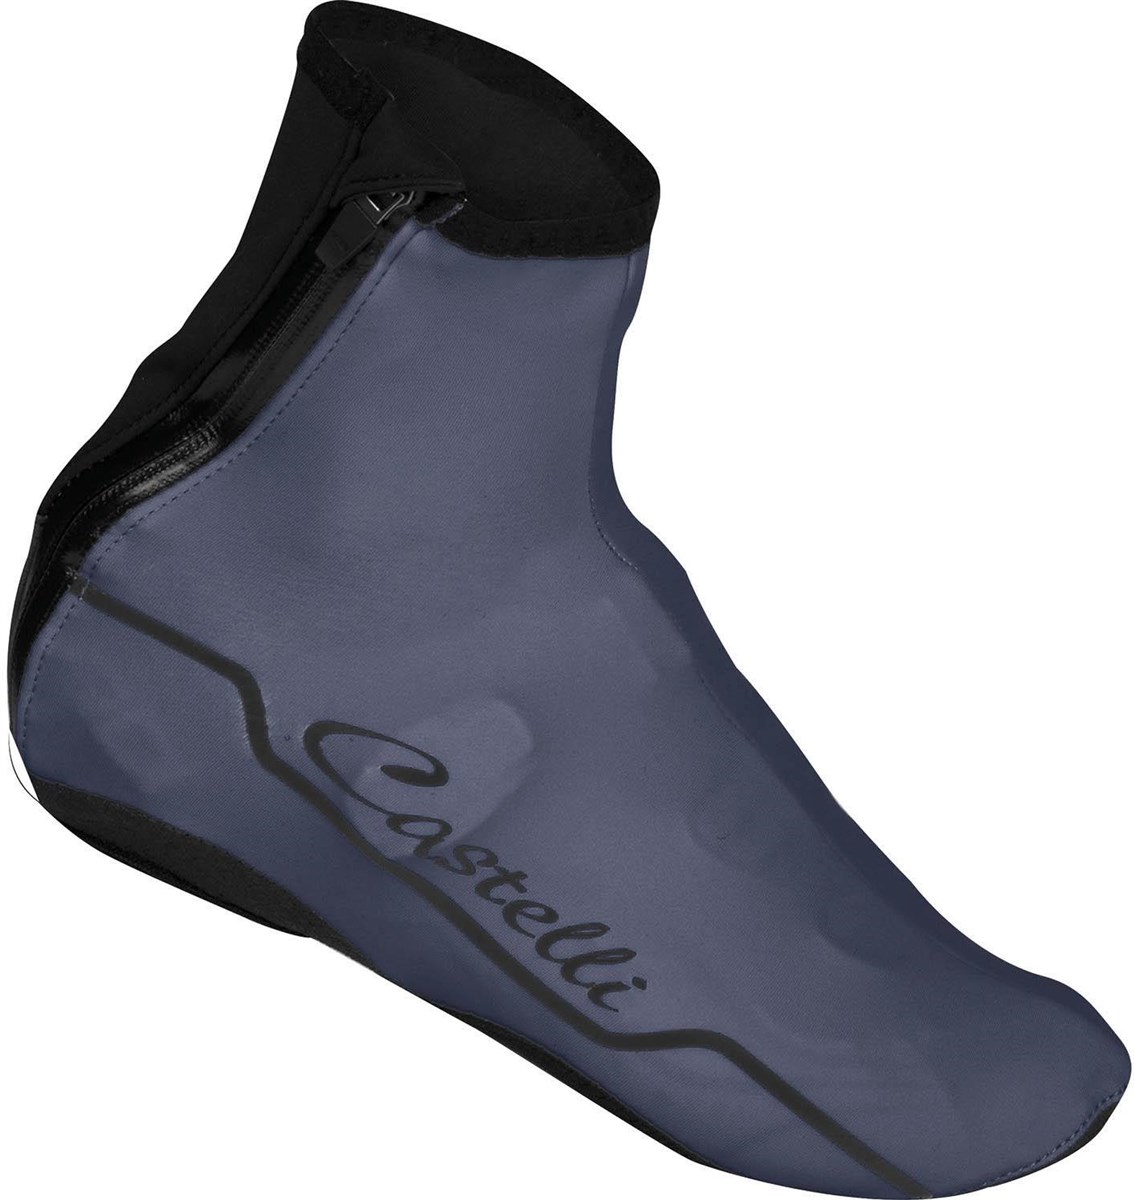 Castelli Troppo Womens Shoecovers AW16 product image